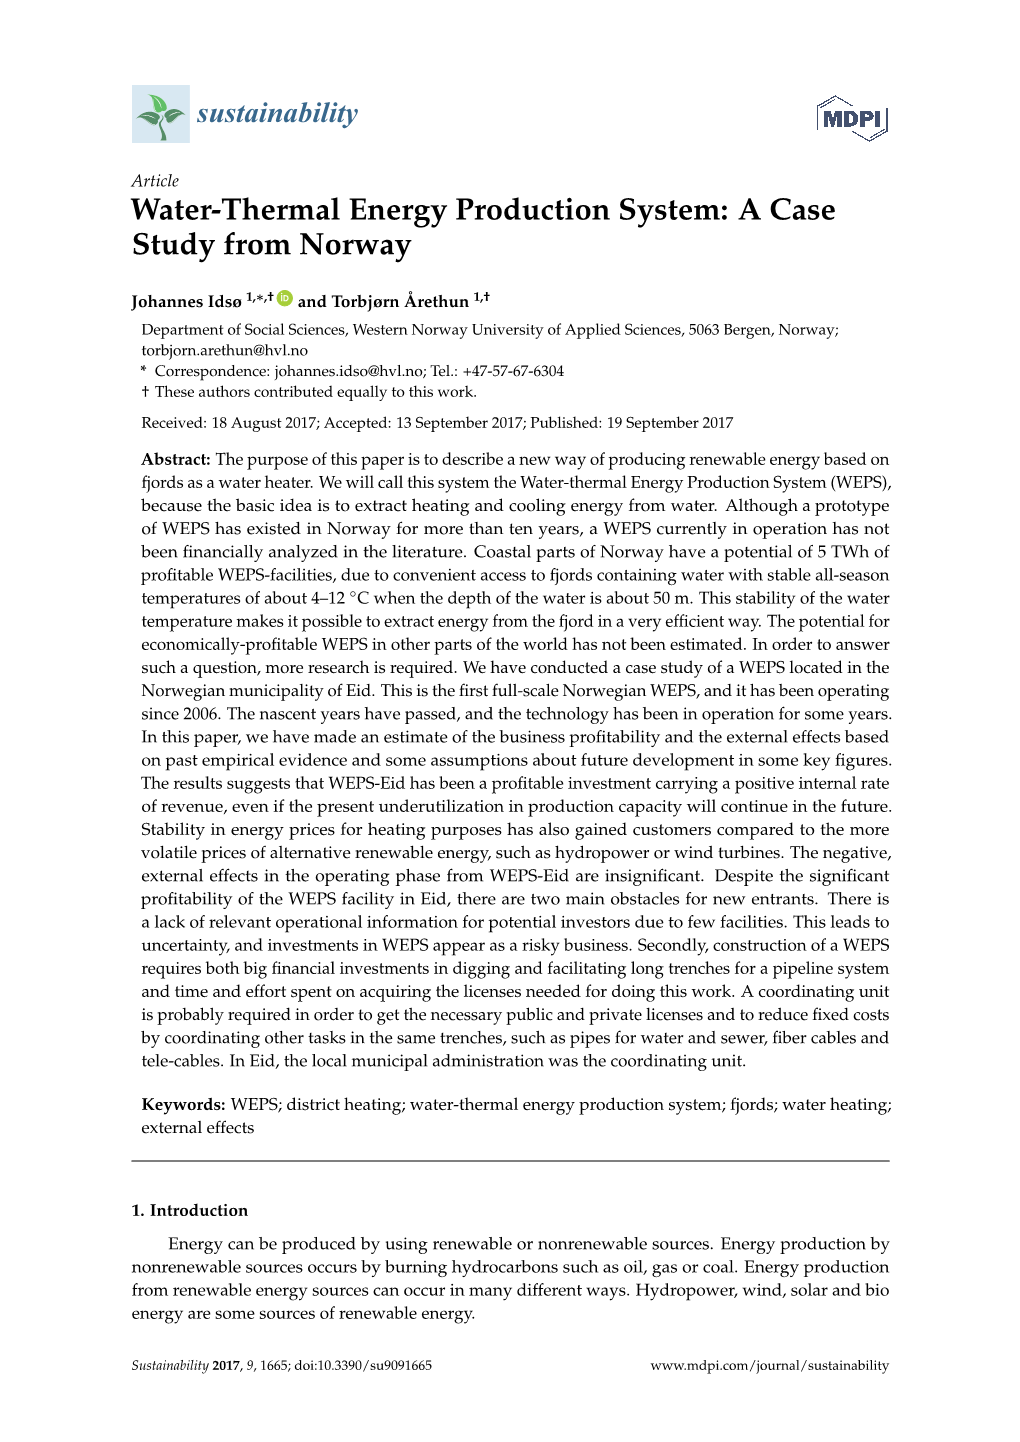 Water-Thermal Energy Production System: a Case Study from Norway